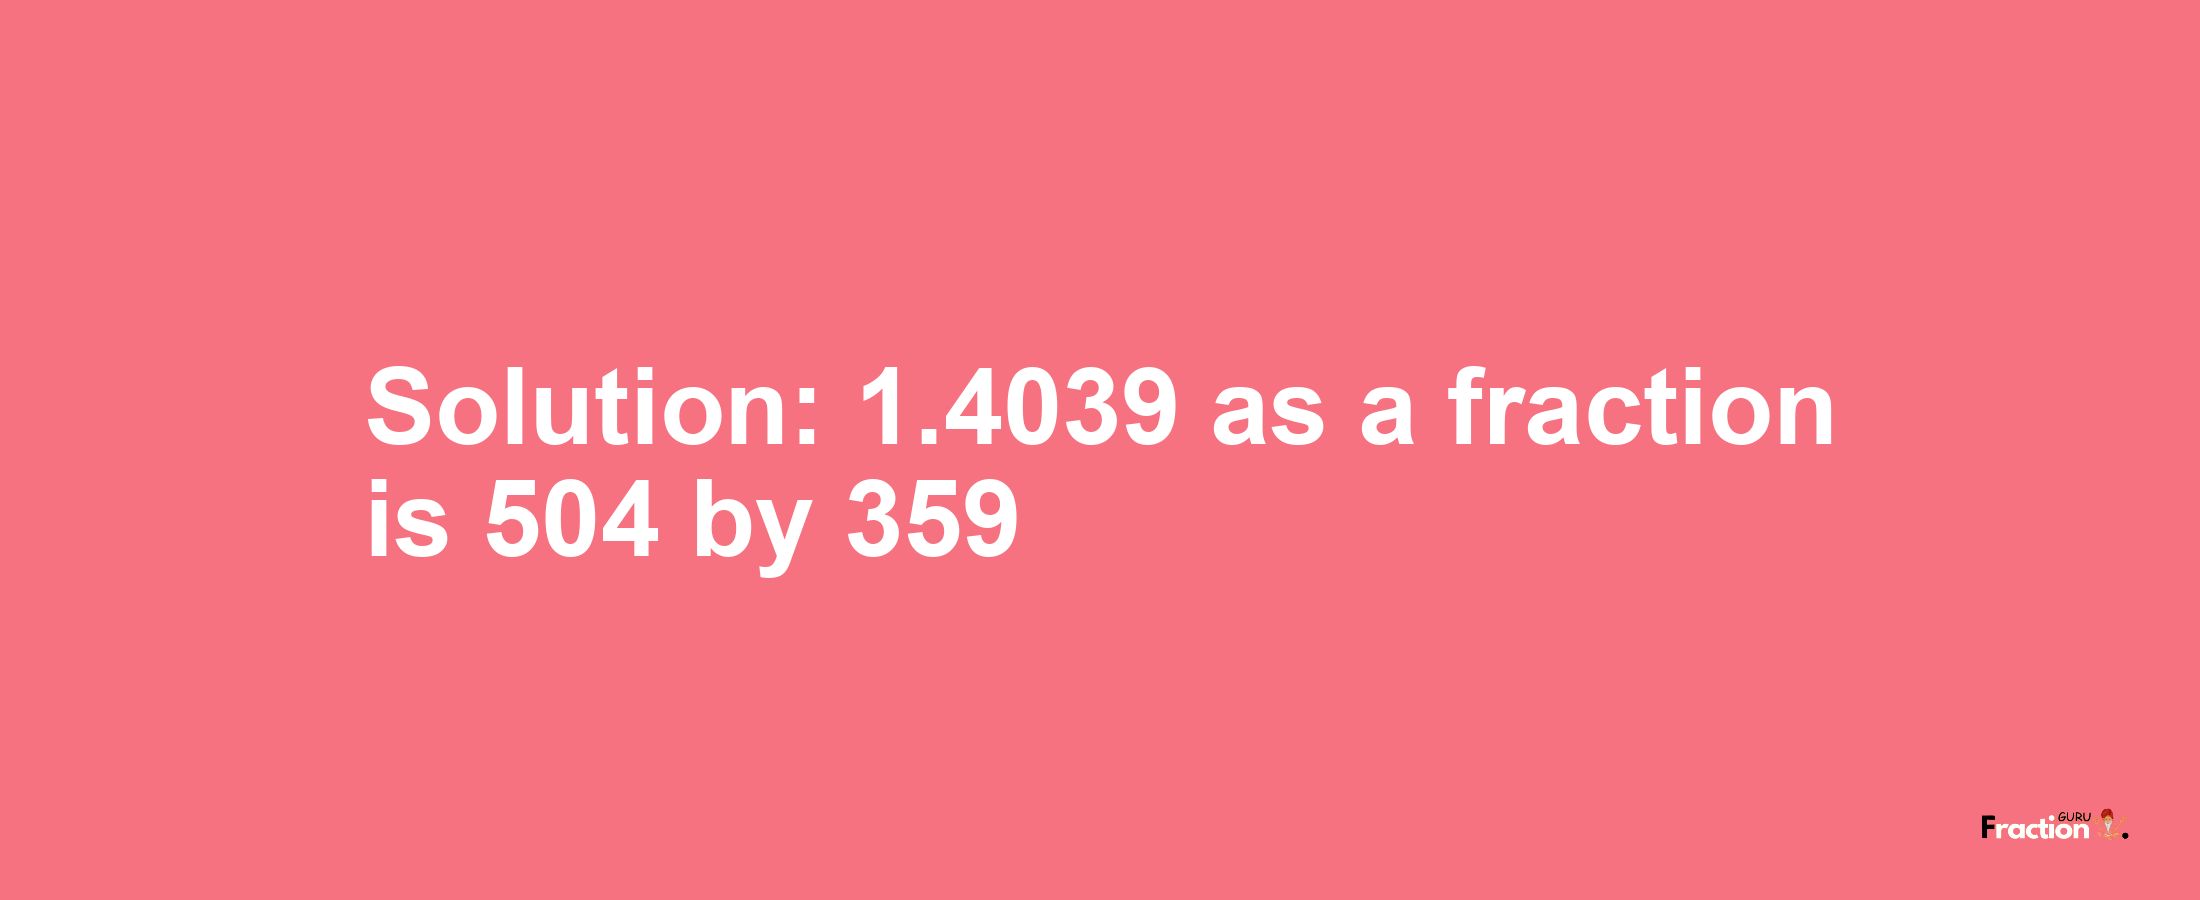 Solution:1.4039 as a fraction is 504/359